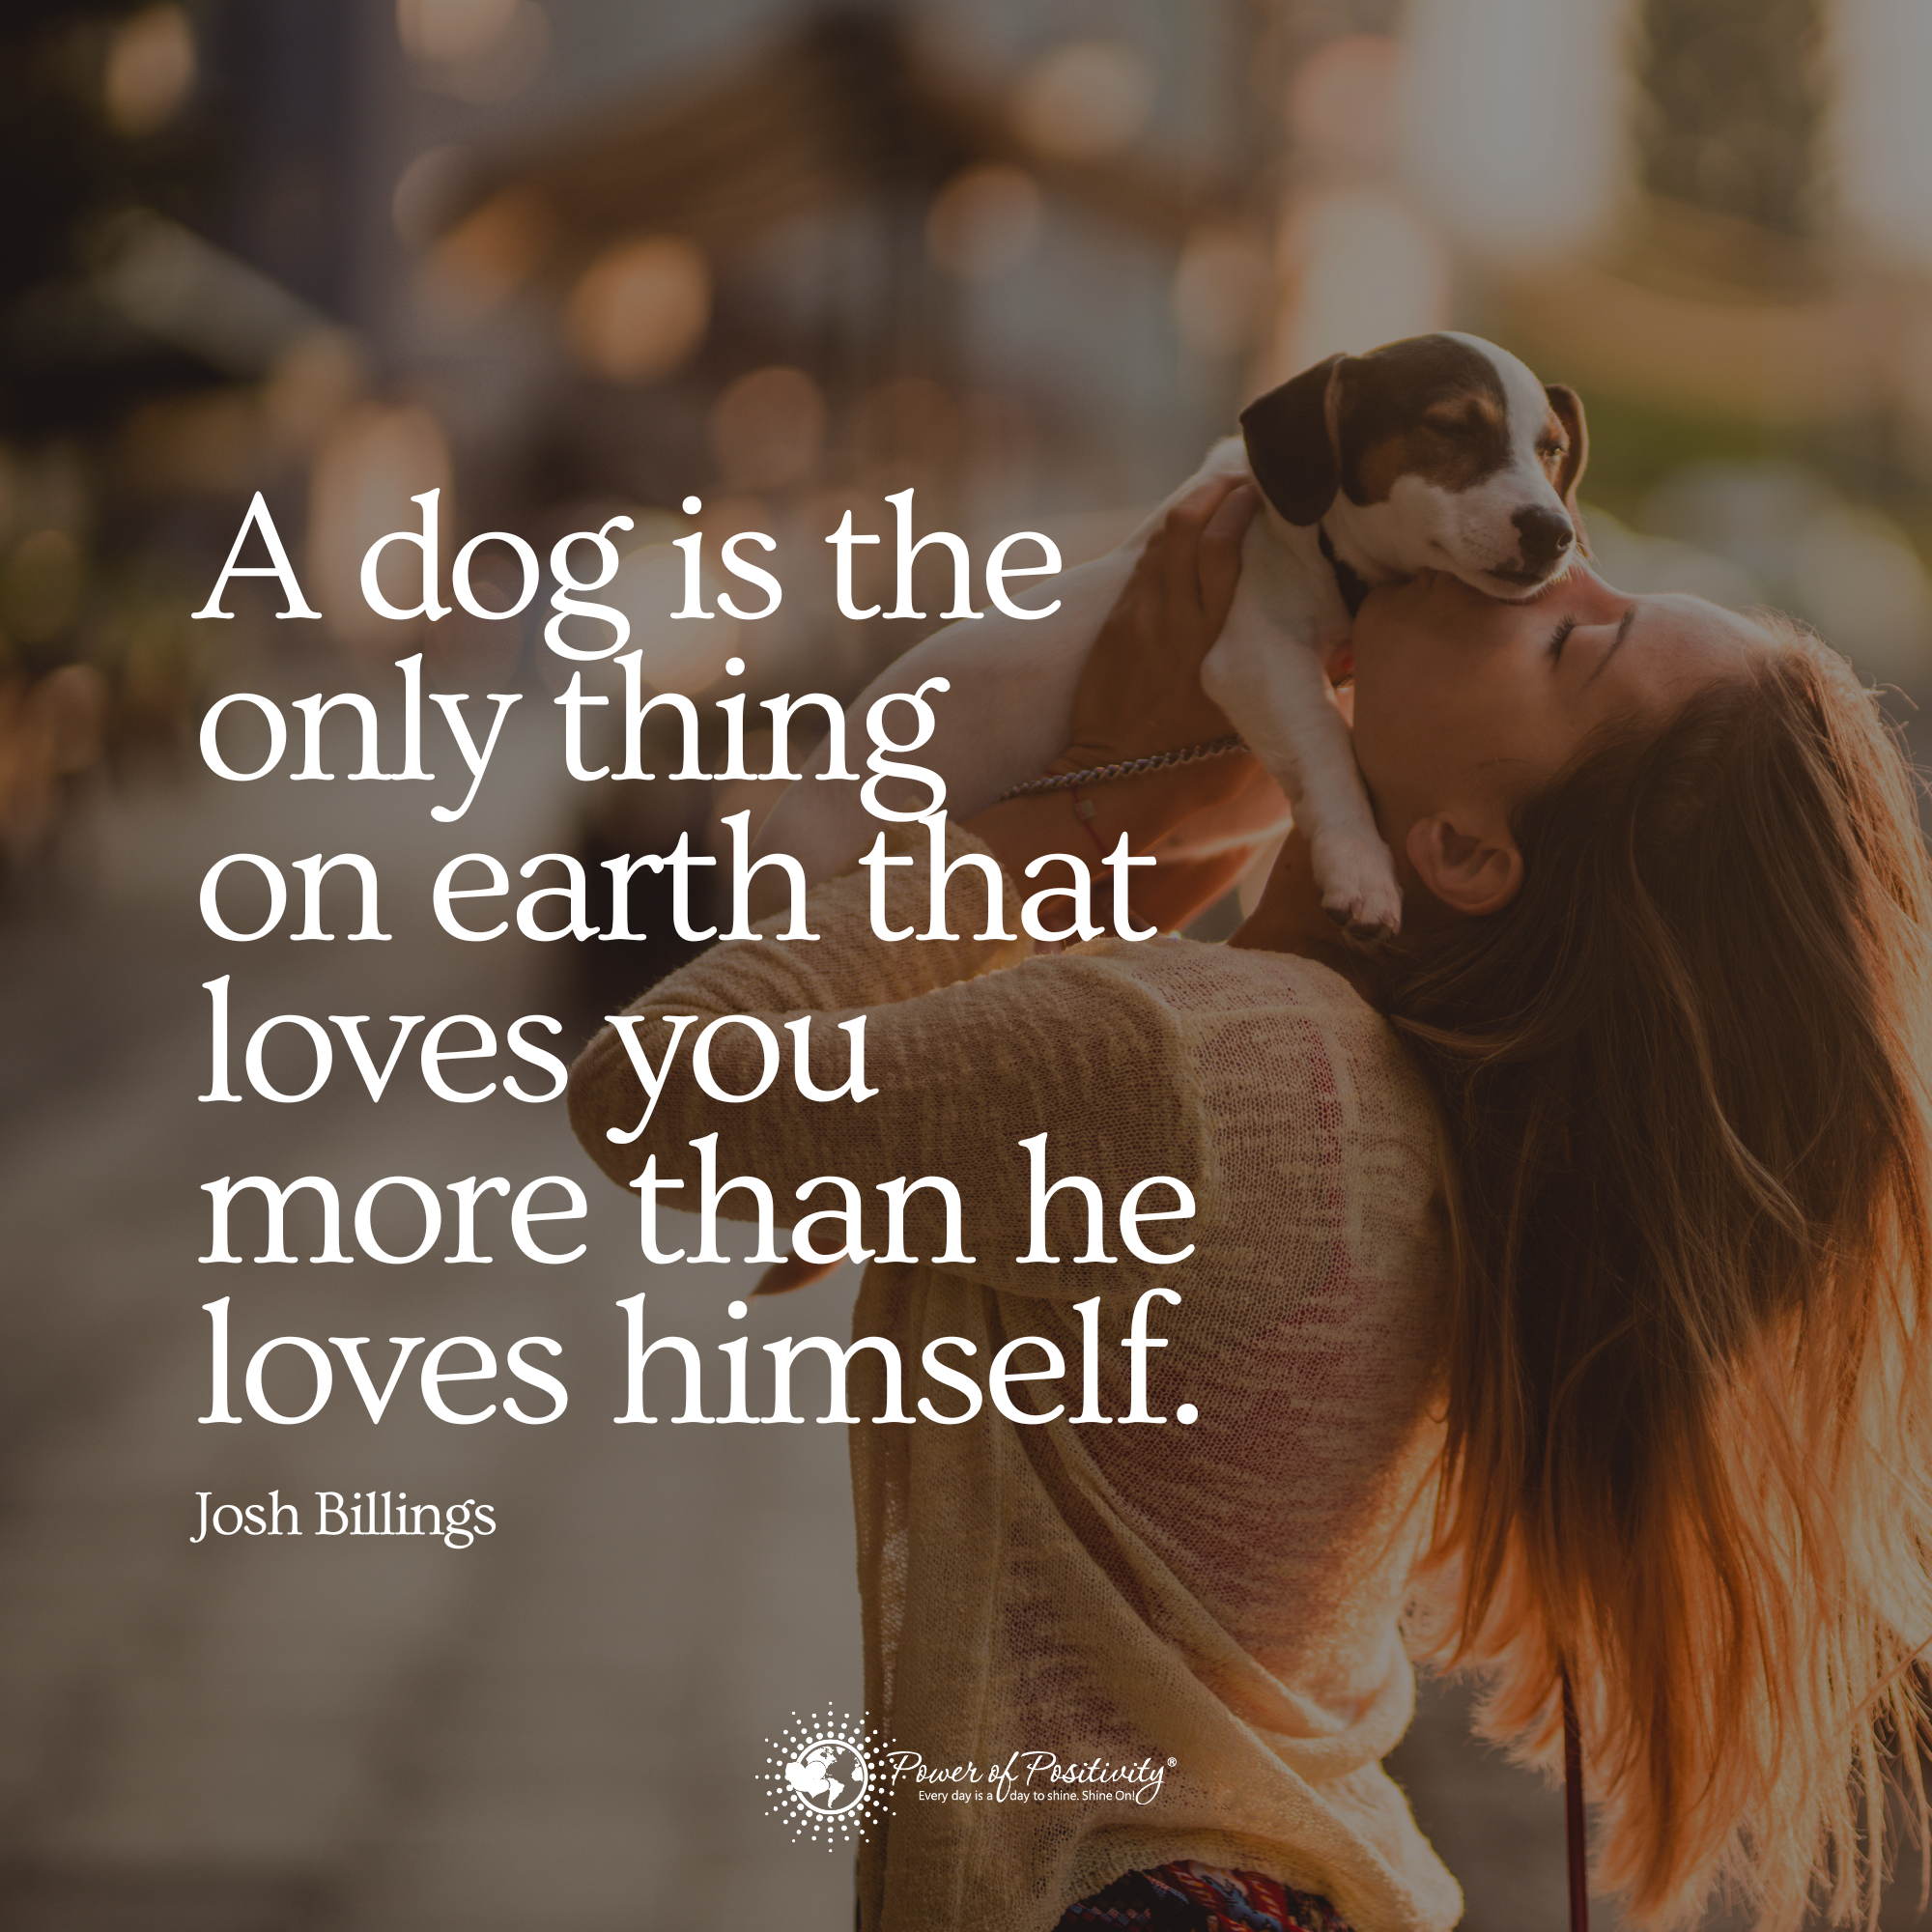 10 Reasons Why Animal Lovers Make The Best Relationship Partners